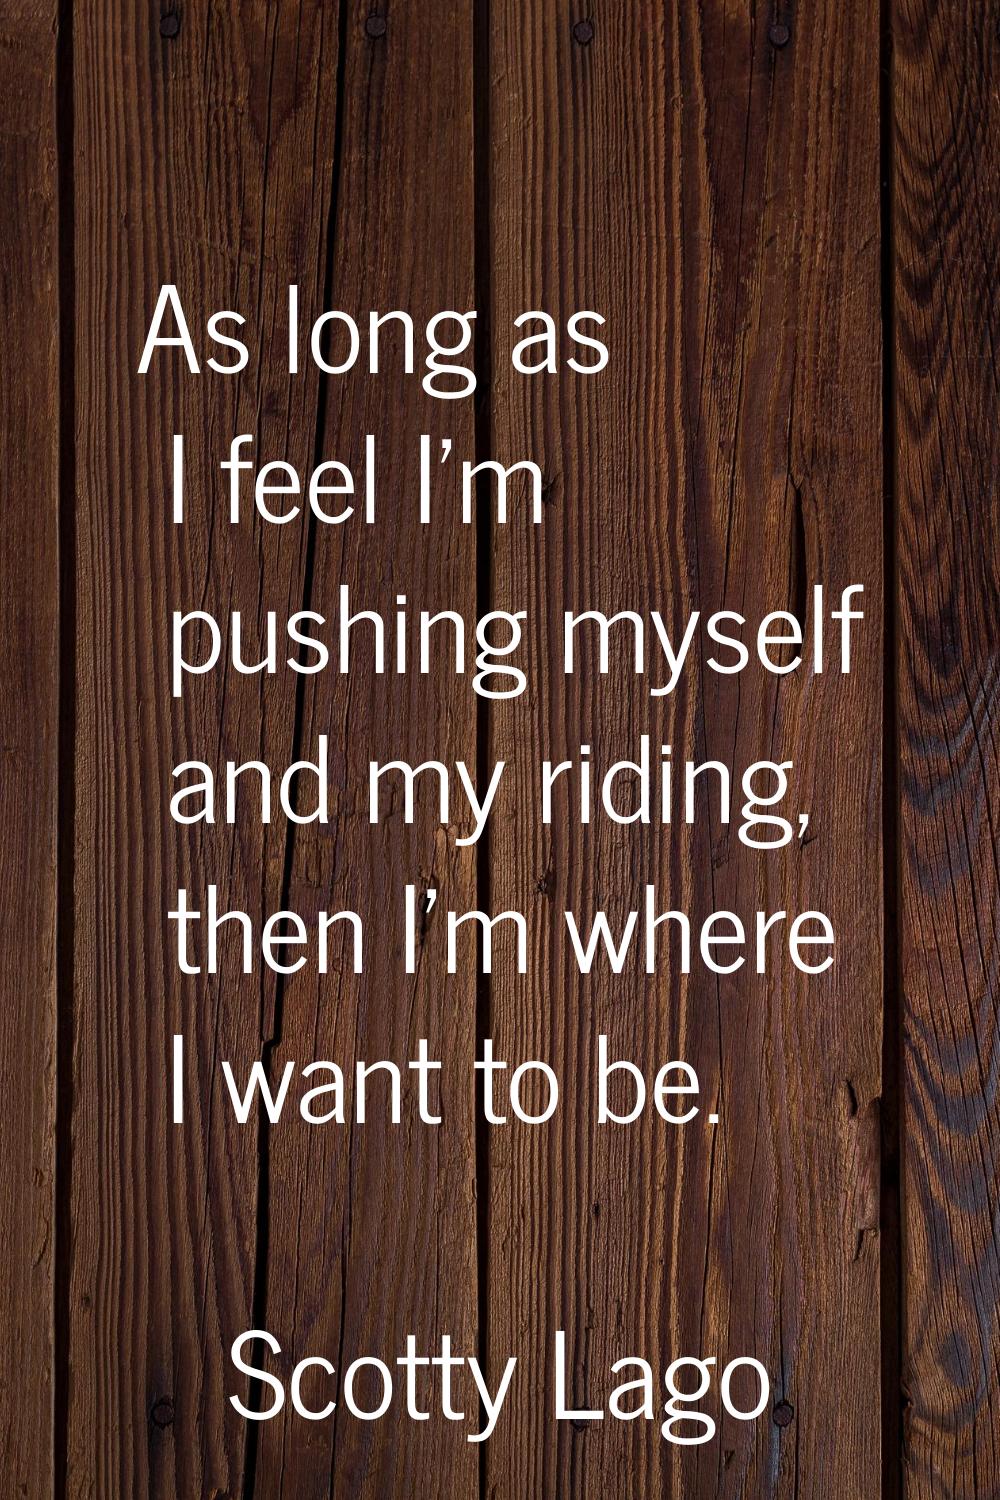 As long as I feel I'm pushing myself and my riding, then I'm where I want to be.